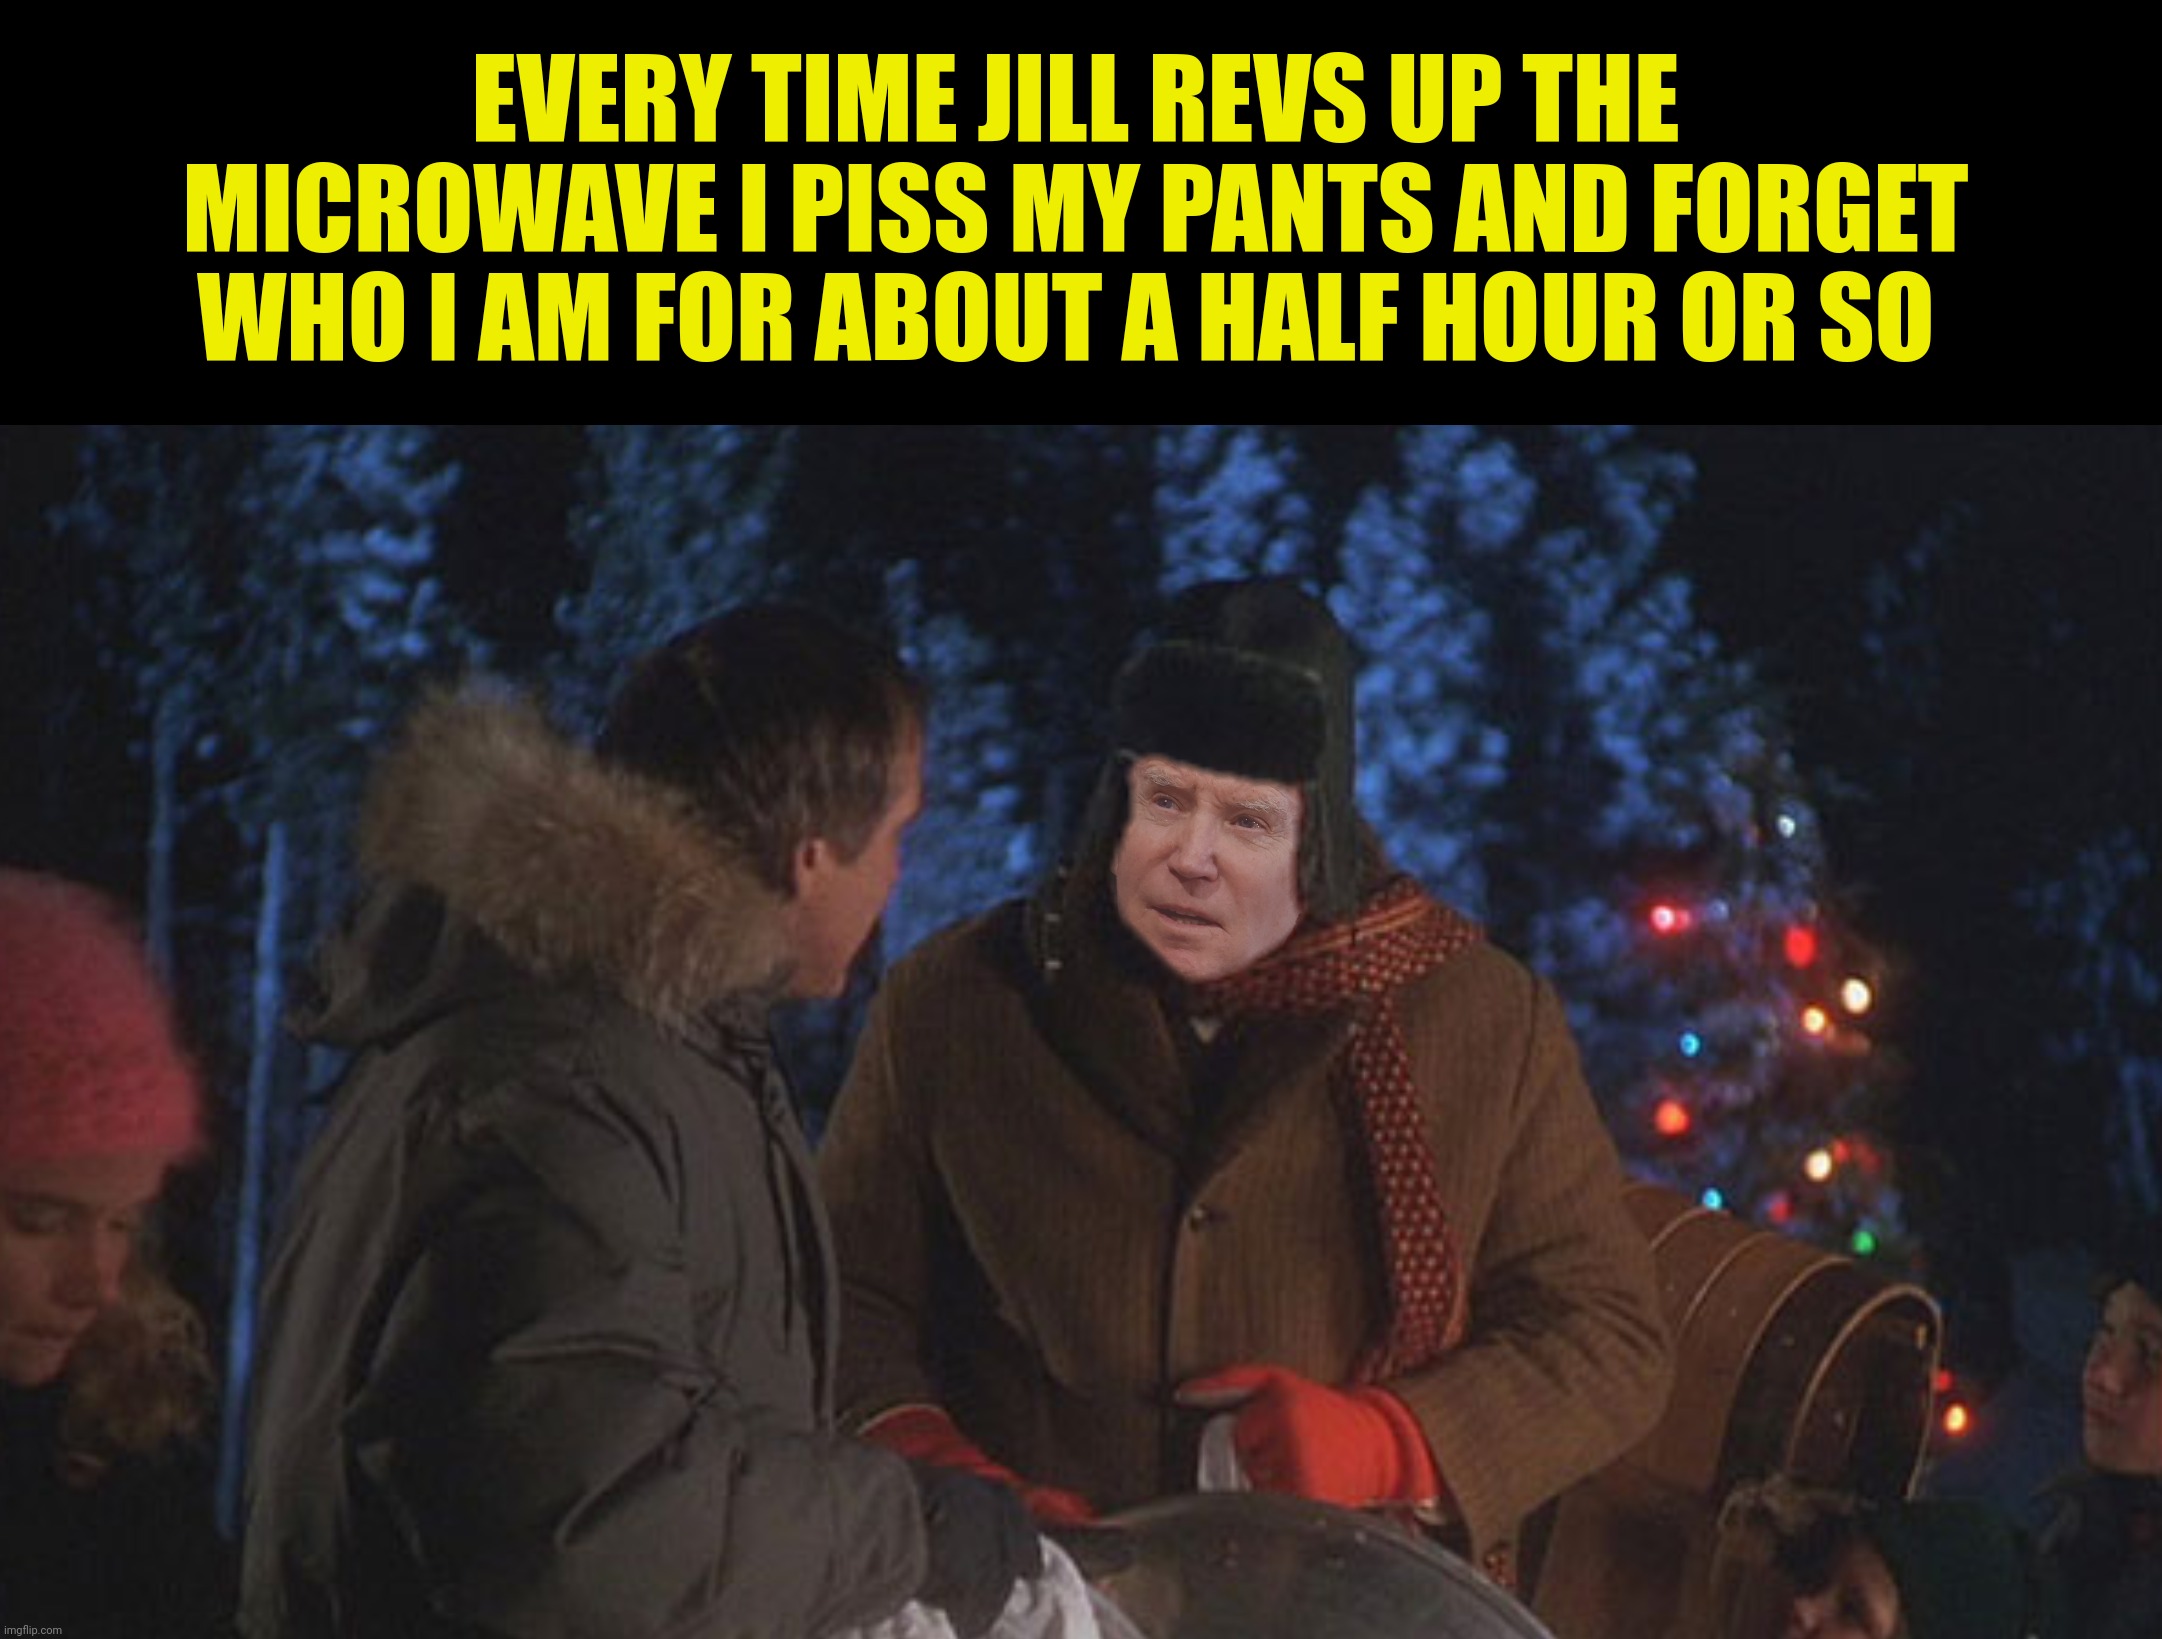 Cousin Bidie | EVERY TIME JILL REVS UP THE MICROWAVE I PISS MY PANTS AND FORGET WHO I AM FOR ABOUT A HALF HOUR OR SO | image tagged in bad photoshop,joe biden,christmas vacation,cousin eddie | made w/ Imgflip meme maker